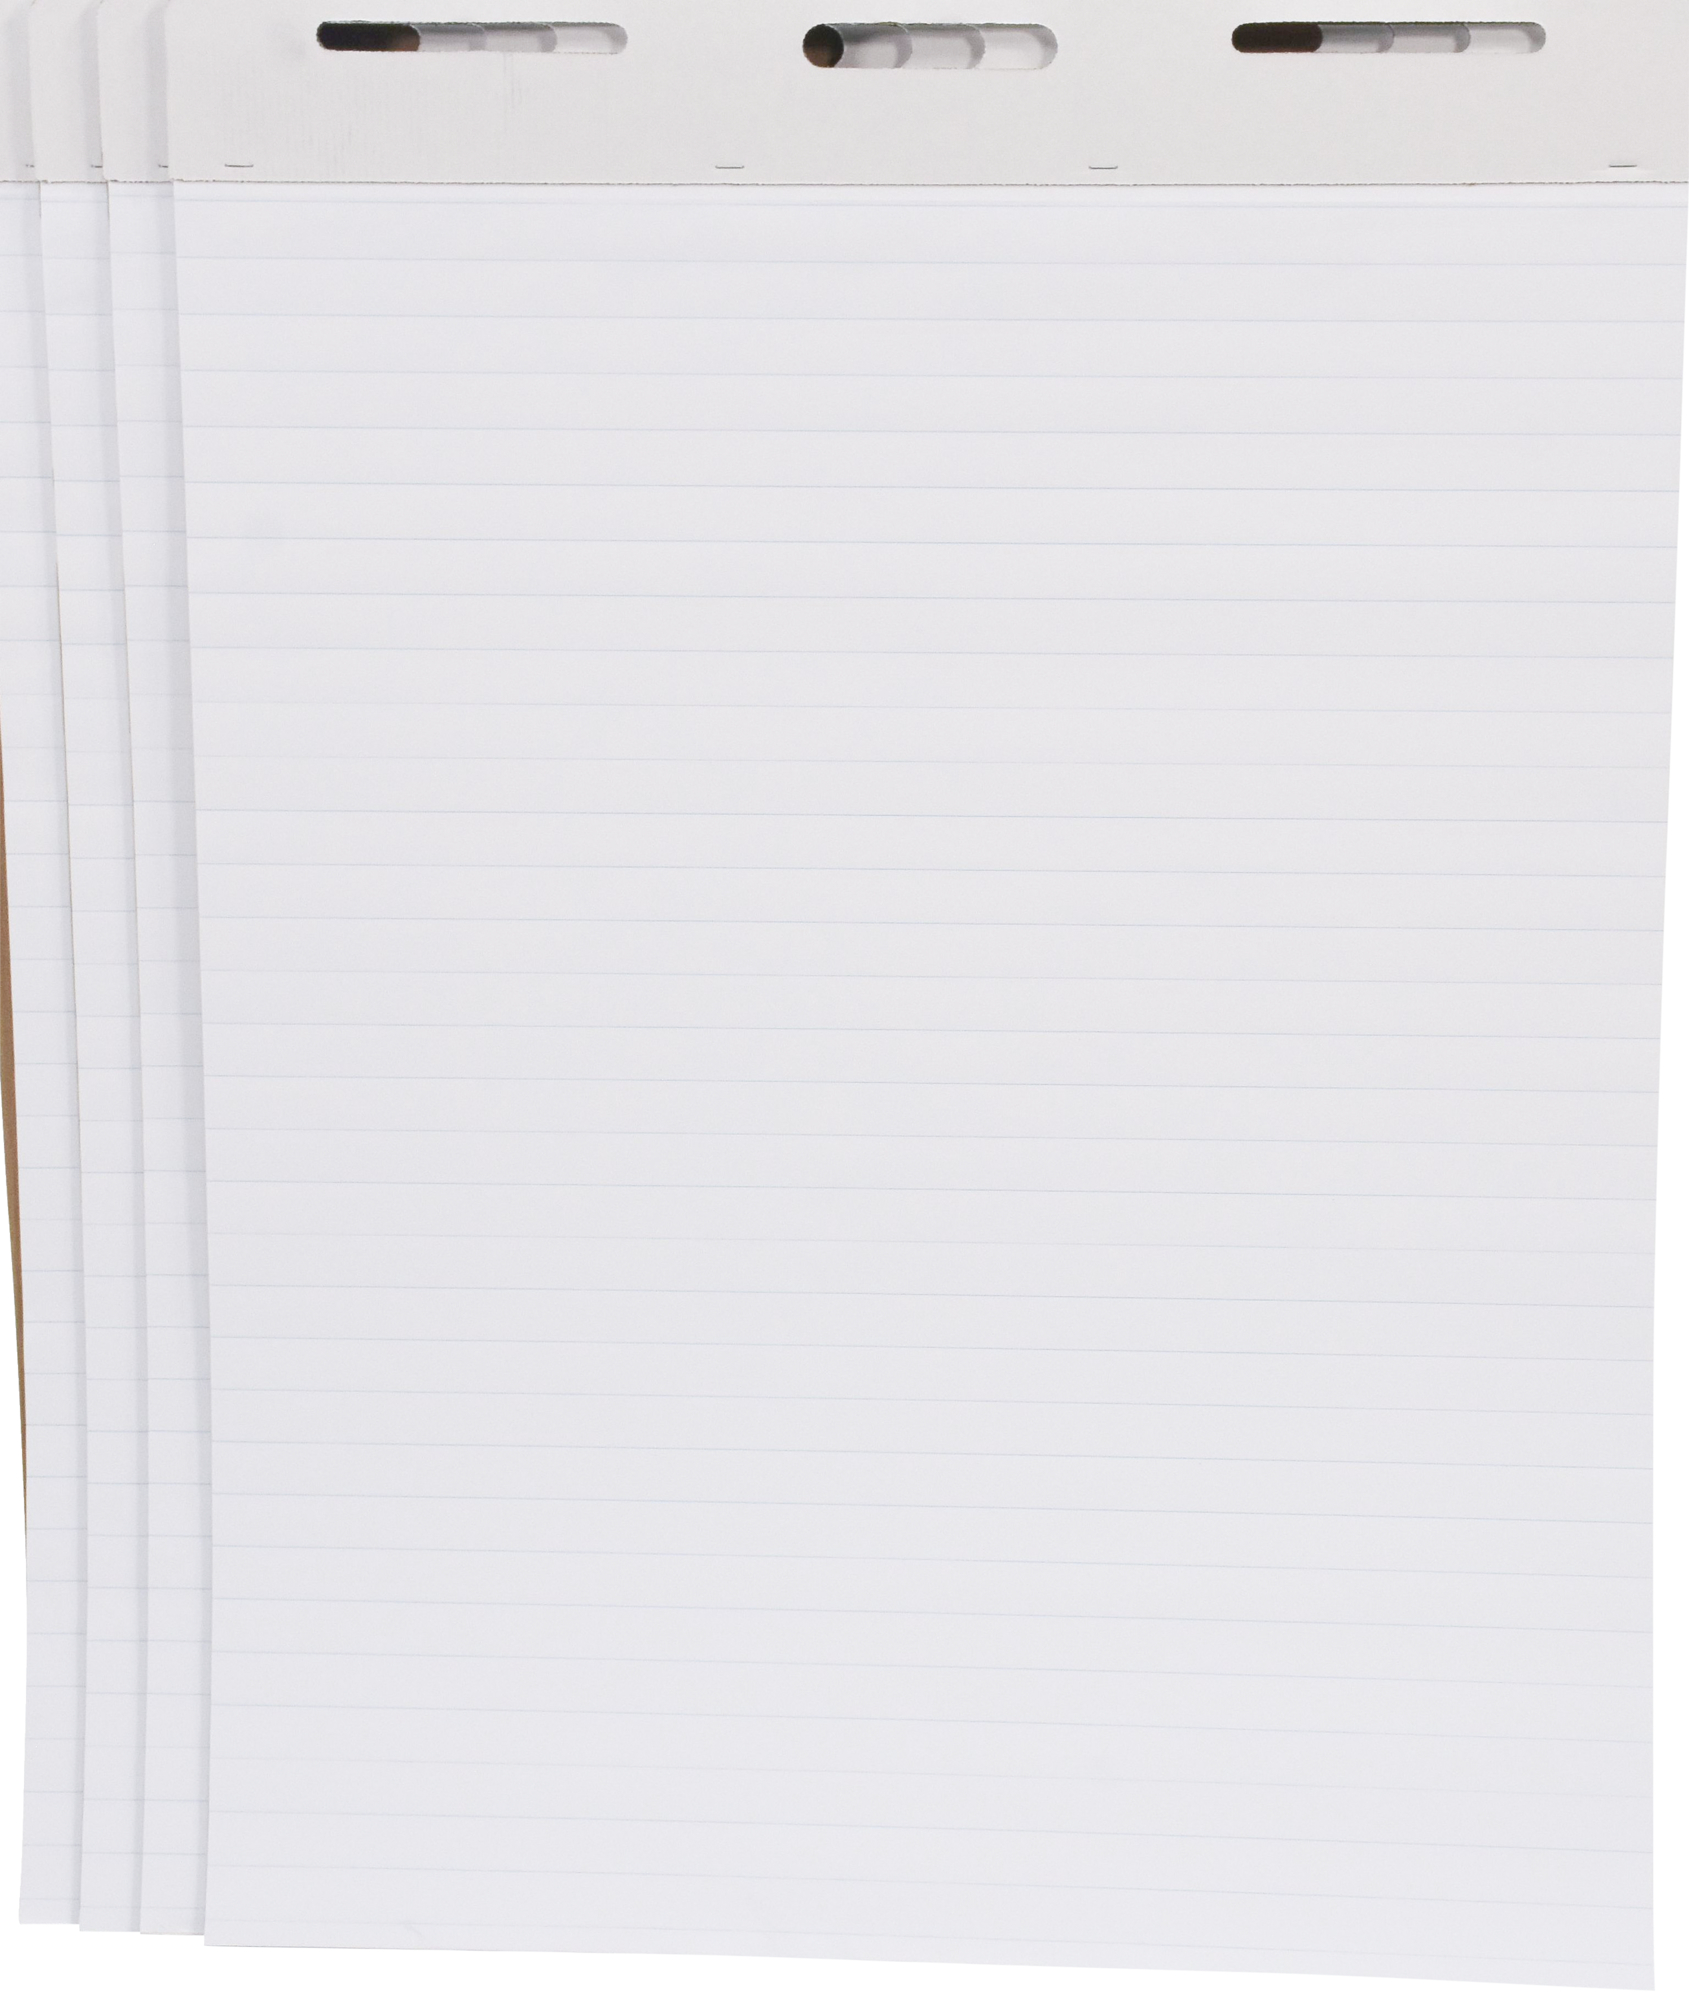 School Smart Ruled Flip Chart Paper, 34 x 27 Inches, 50 Sheets Each, Pack  of 4